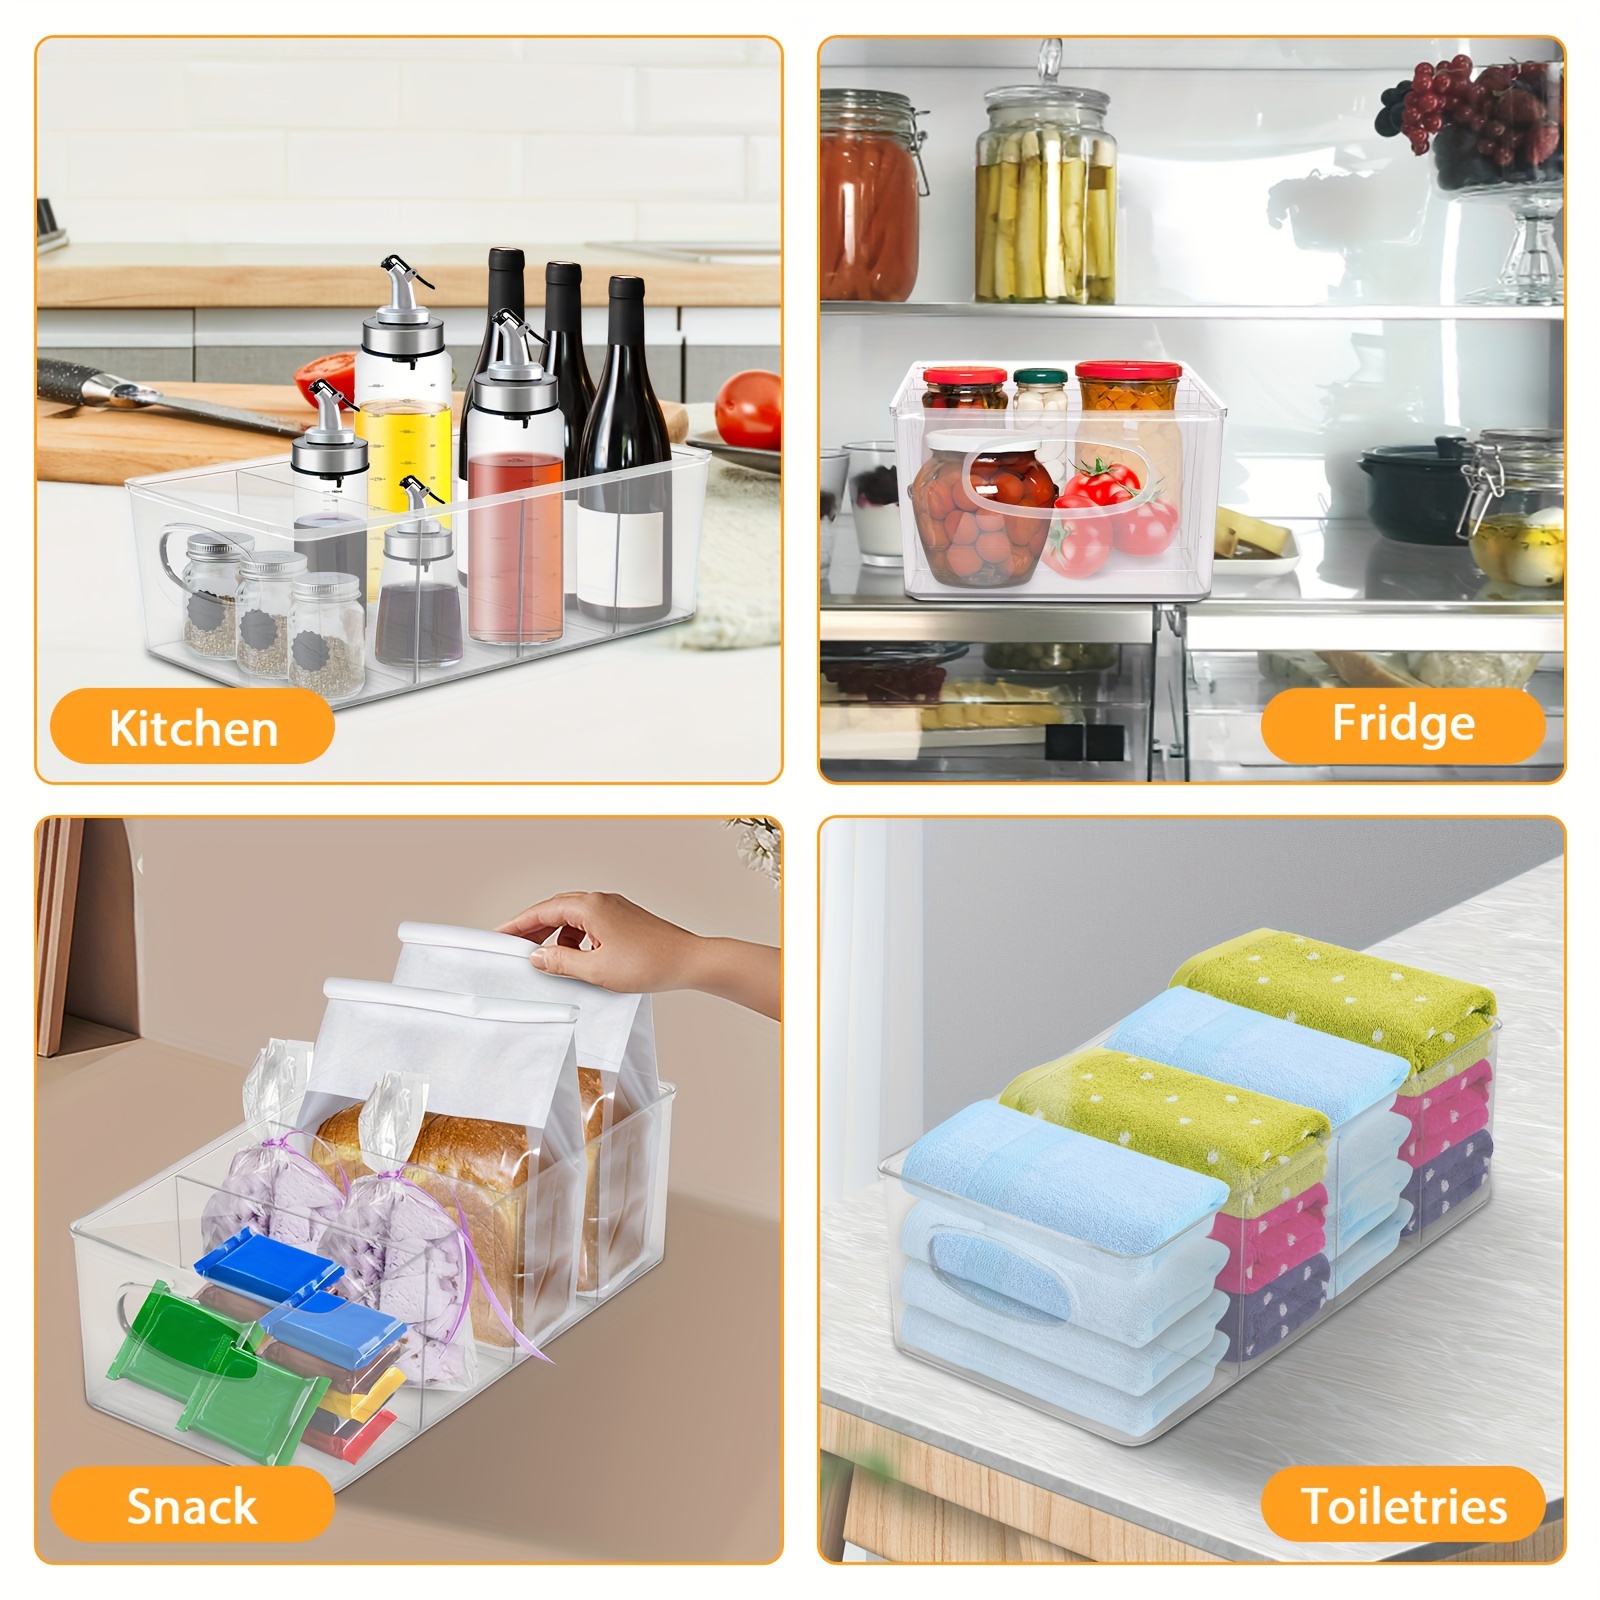 11 x 5.5 x 3.5 Clear Plastic Storage Bins with Dividers